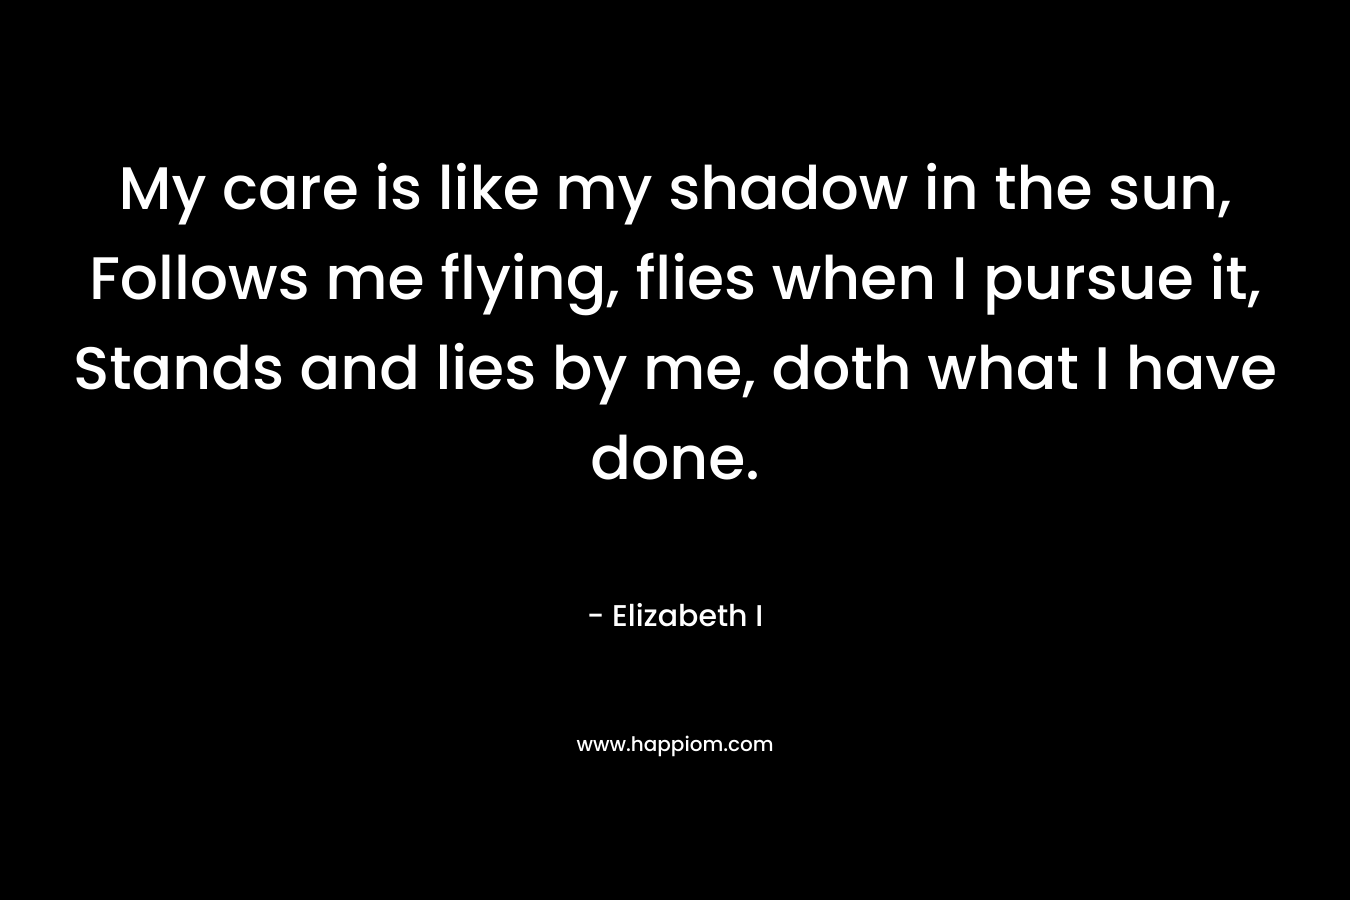 My care is like my shadow in the sun, Follows me flying, flies when I pursue it, Stands and lies by me, doth what I have done.